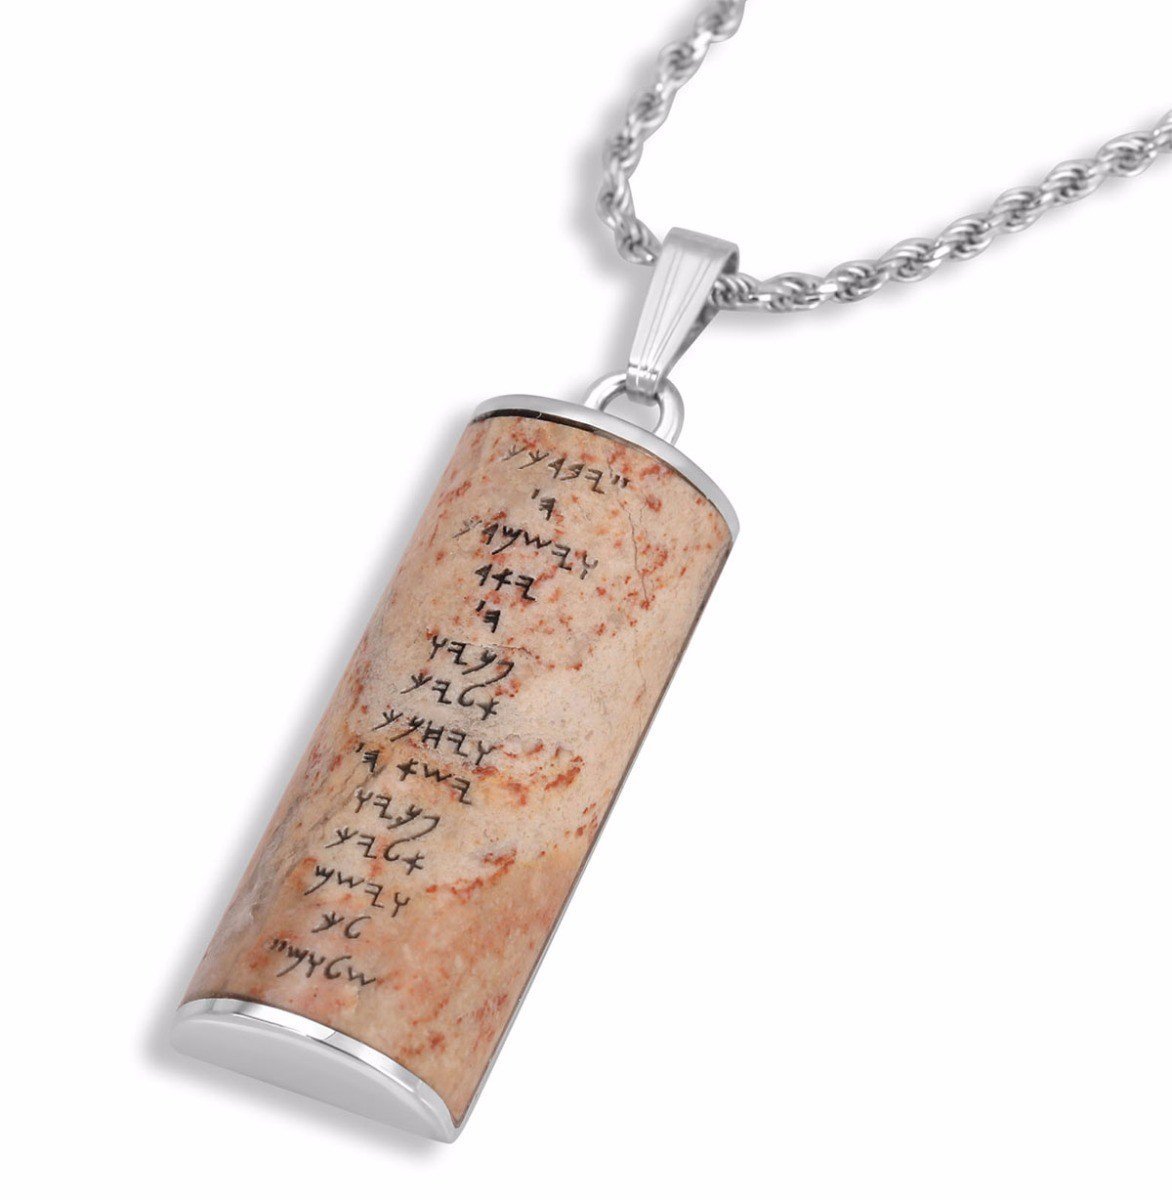 Rafael Jewelry Jerusalem Stone Necklace with Priestly Blessing in Ancient Hebrew - 1